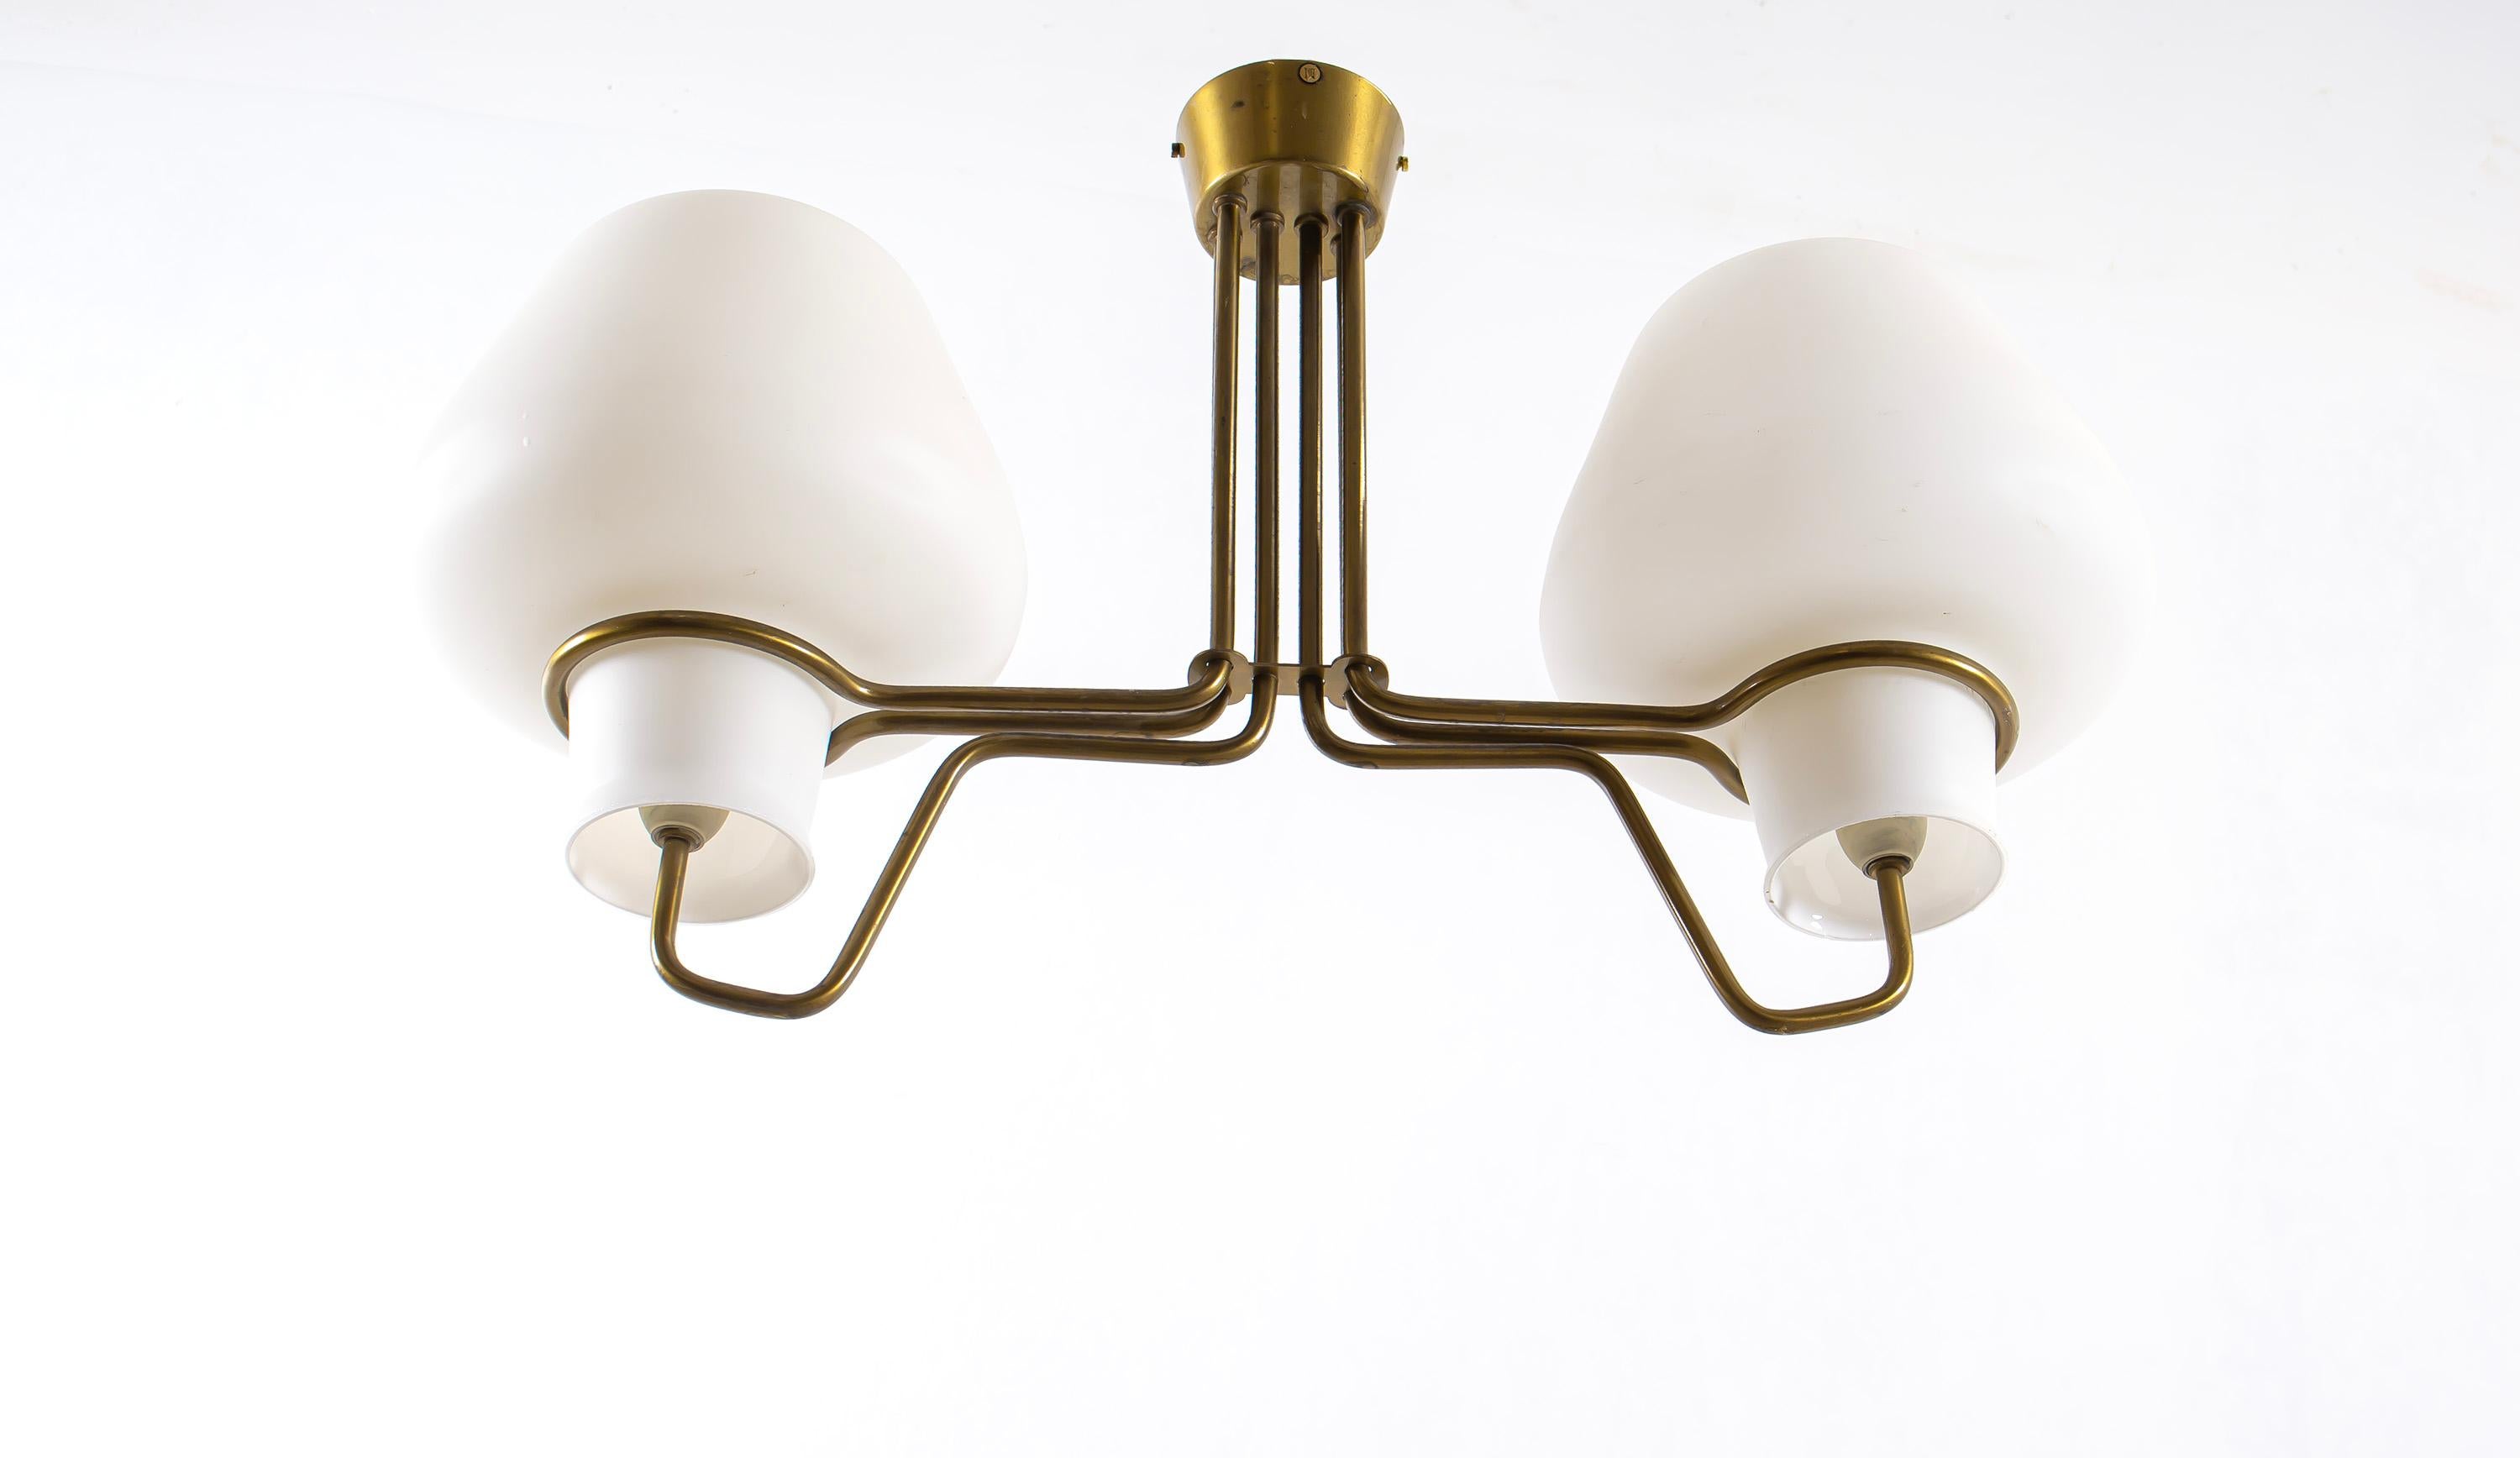 Scandinavian Midcentury Ceiling Light, Norway, 1960s In Good Condition For Sale In Oslo, NO